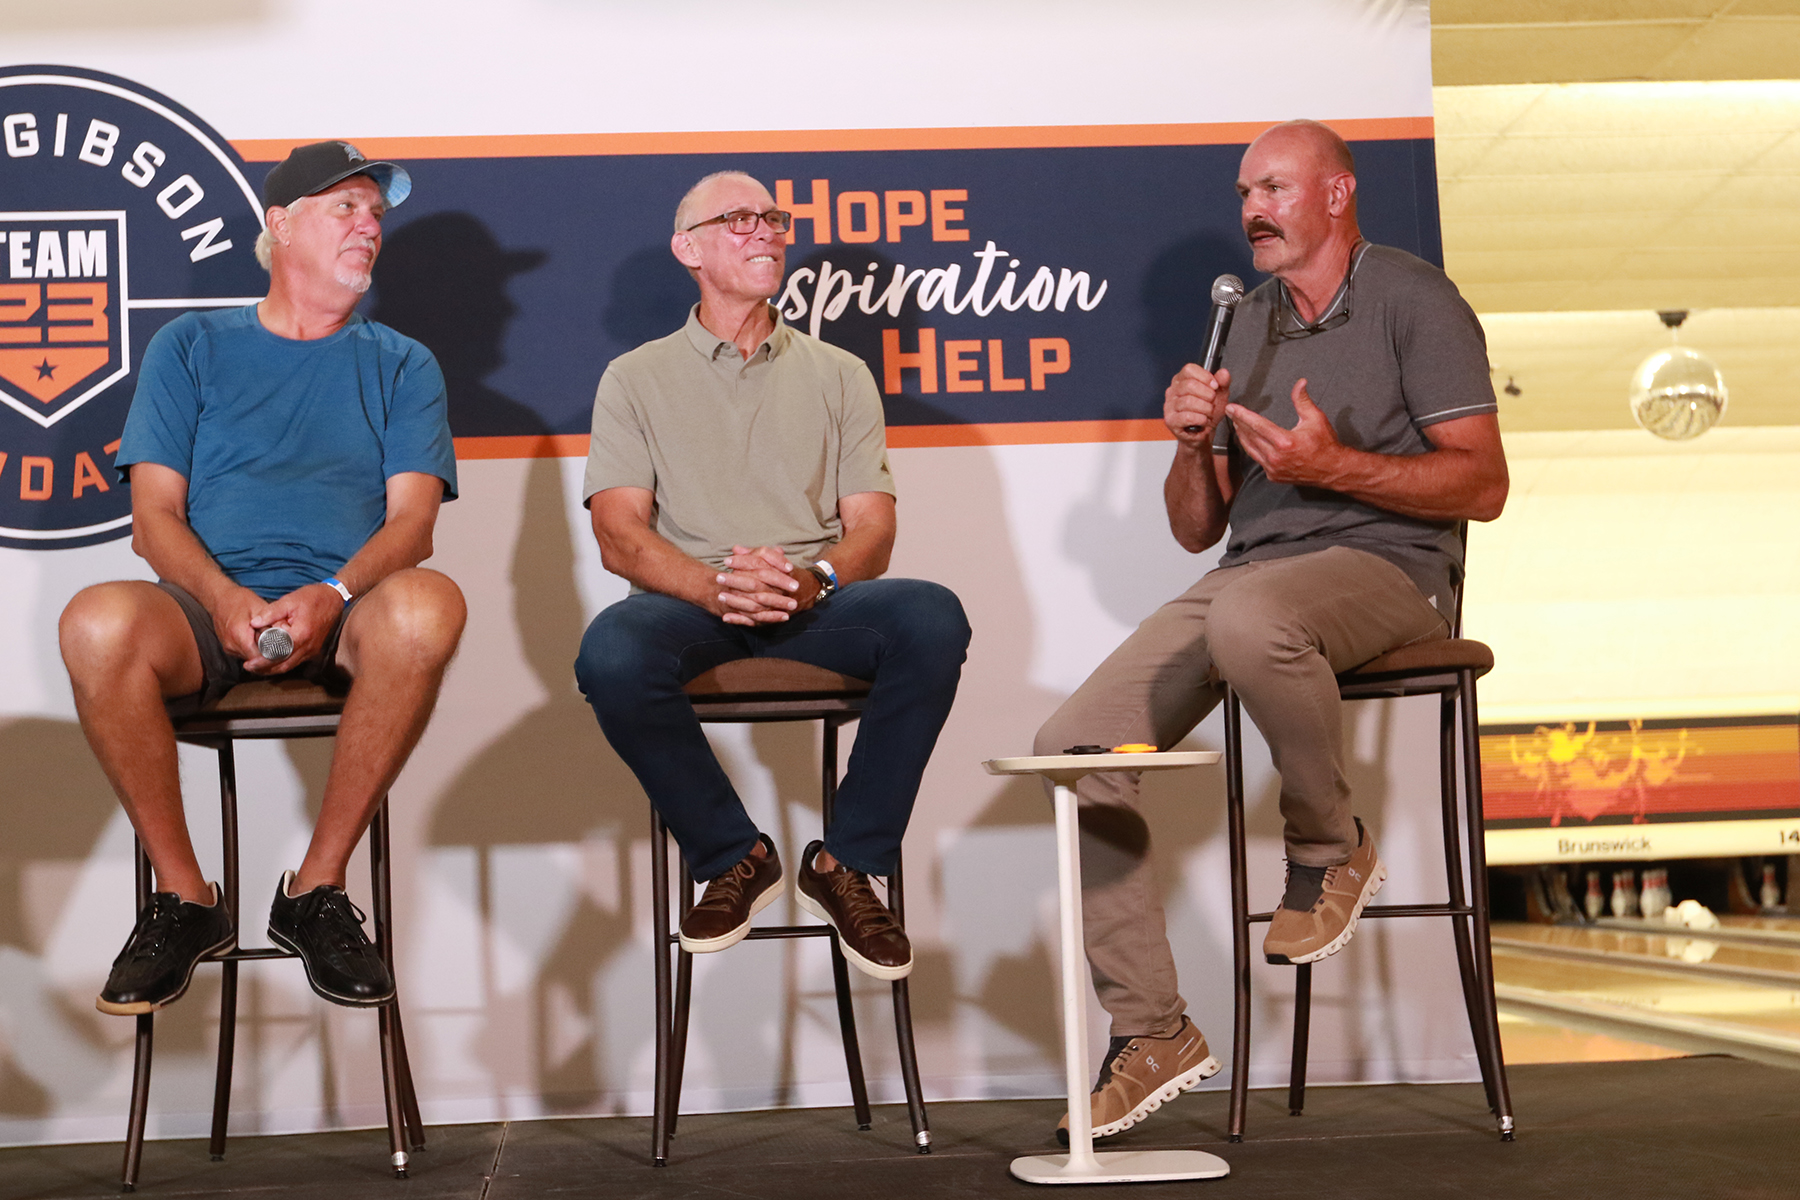 Gibson rallies golfers in fight against Parkinson's at annual outing